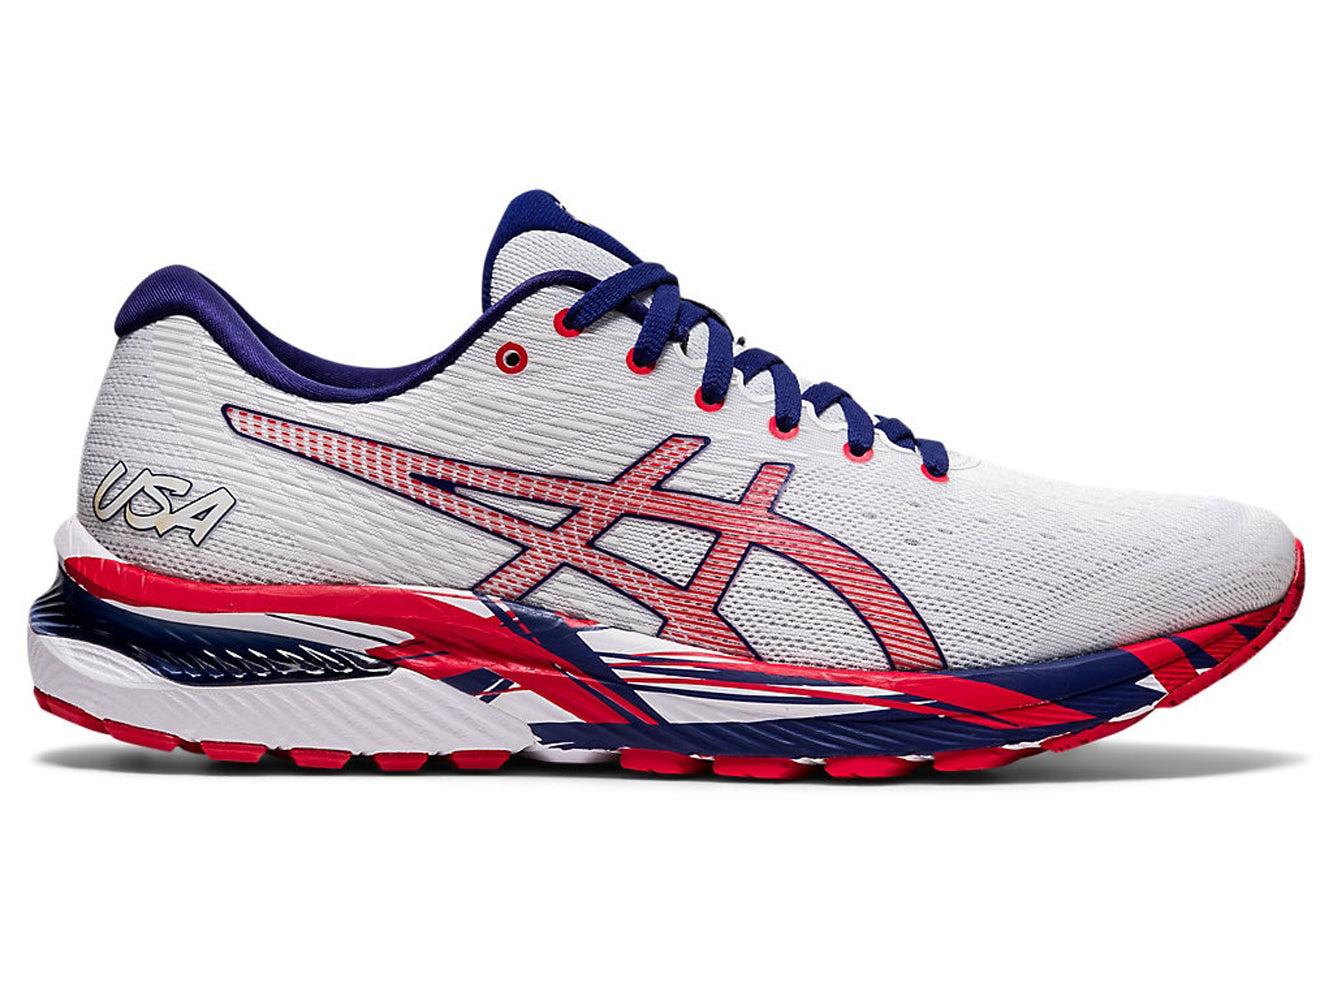 Men's Asics GEL-Cumulus 22 Running Shoe in White/Classic Red from the side